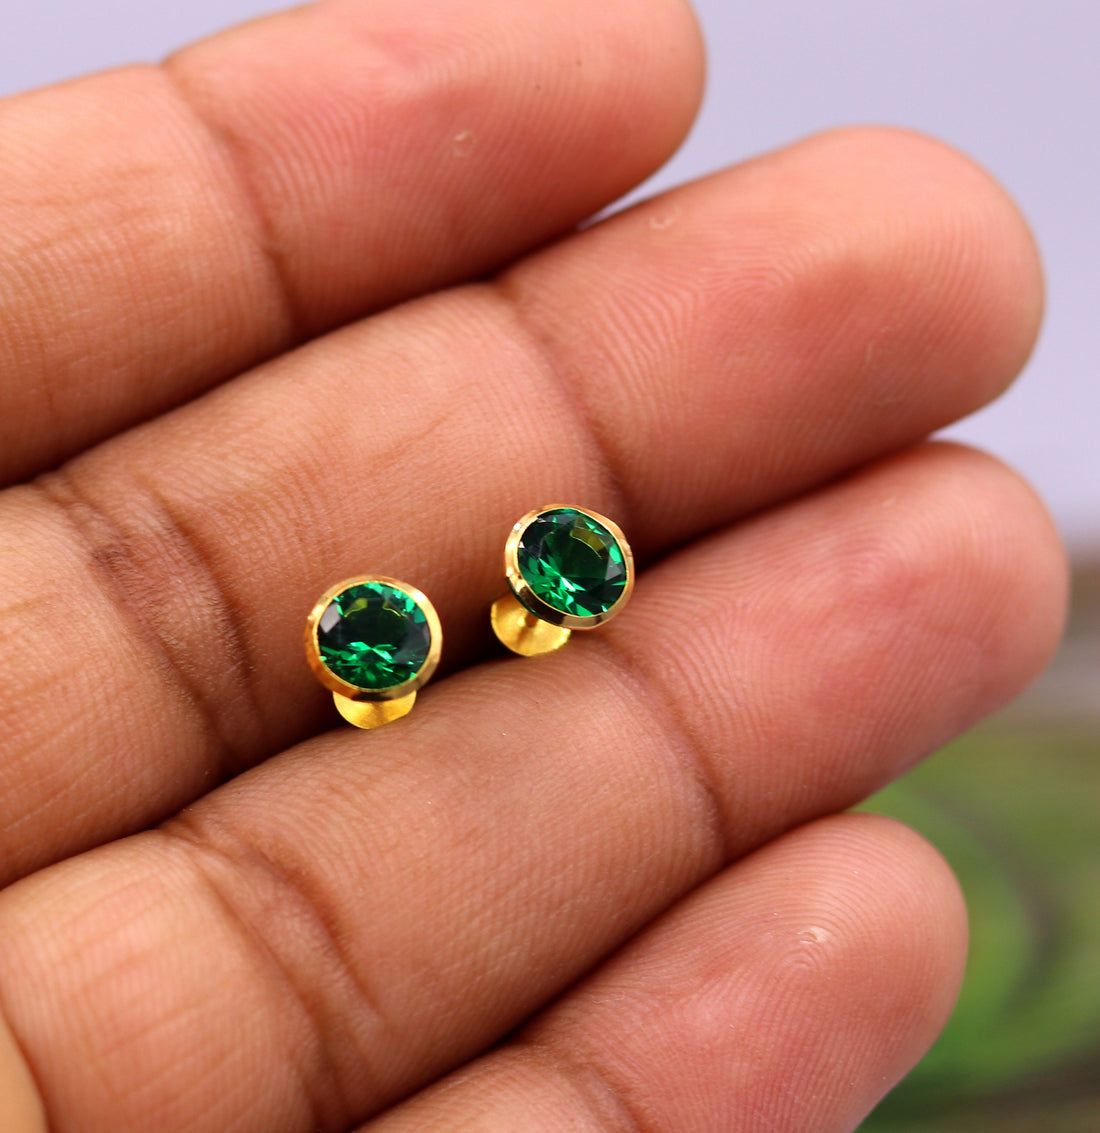 Genuine 18k yellow gold handmade fabulous green stone excellent antique vintage design stud earrings pair unisex jewelry er86 - TRIBAL ORNAMENTS